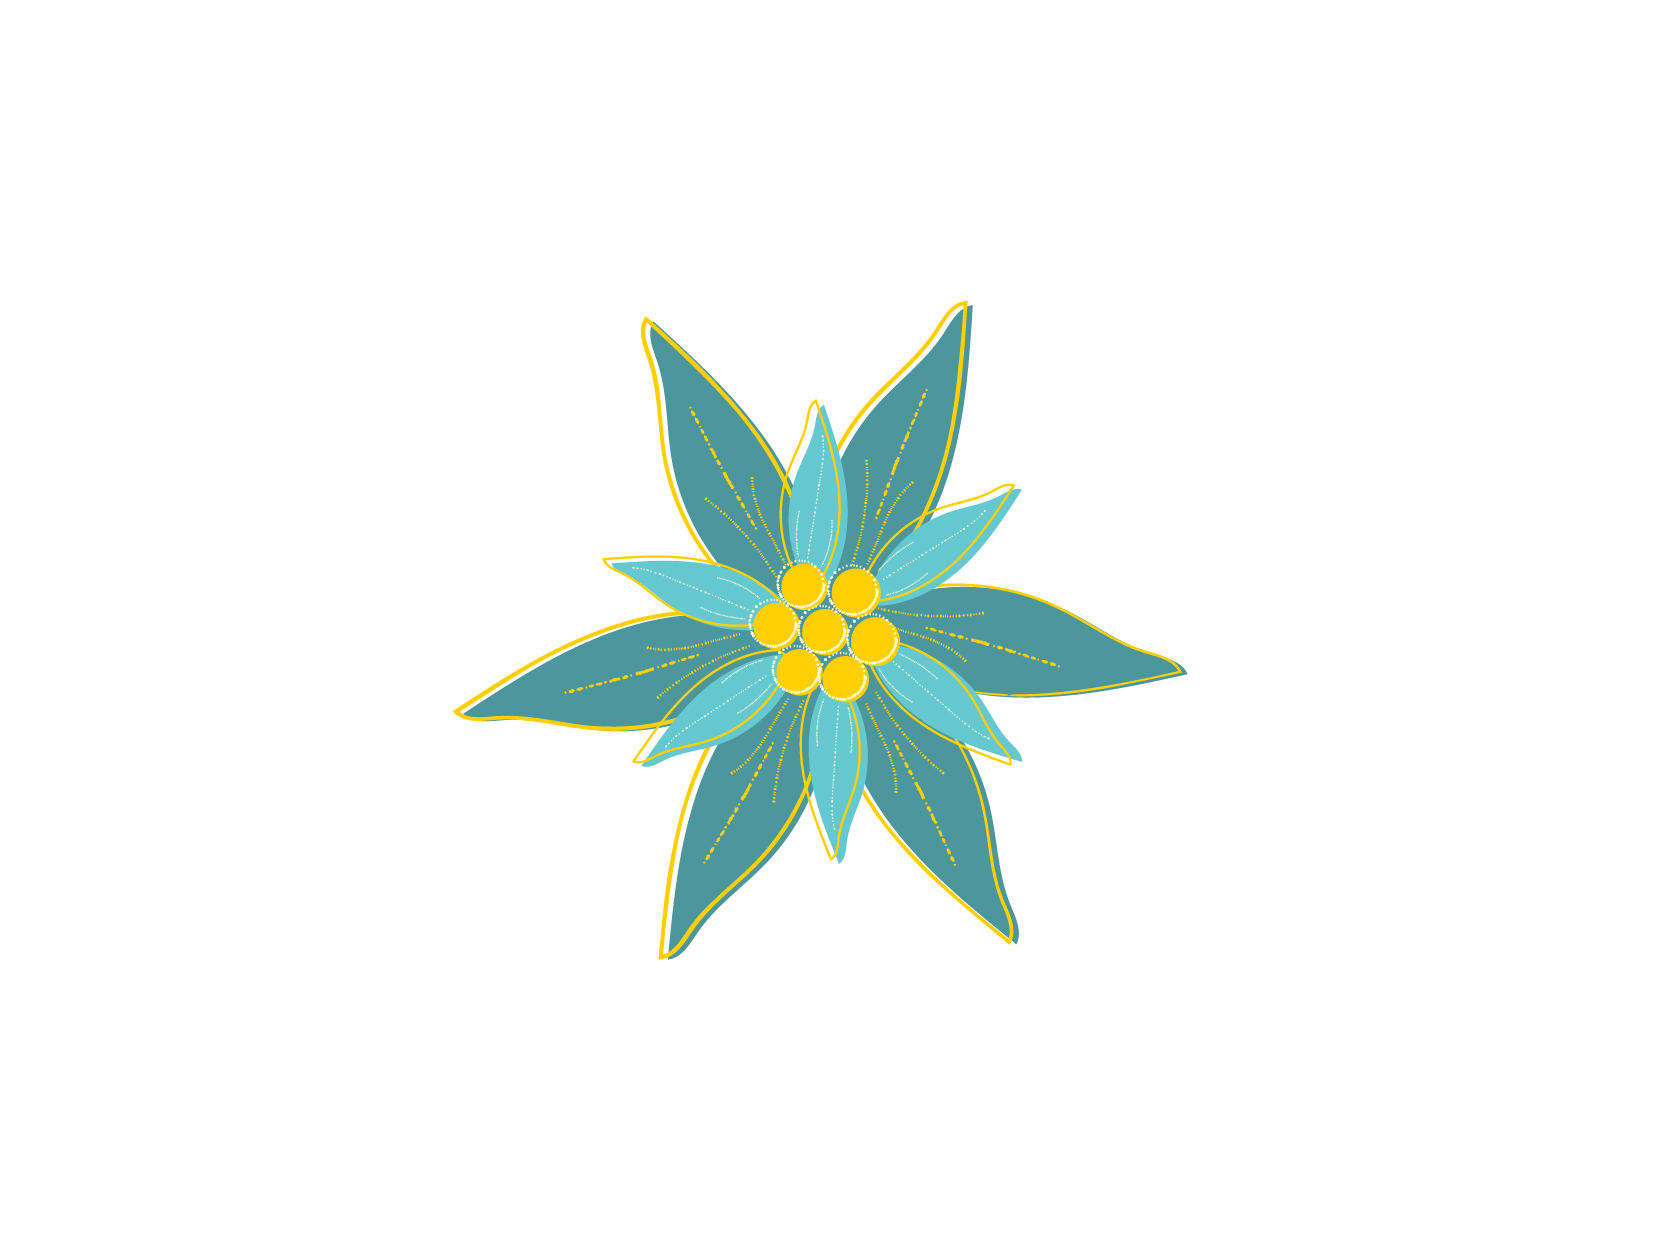 Edelweiss Graphic Illustration in Teal and Gold